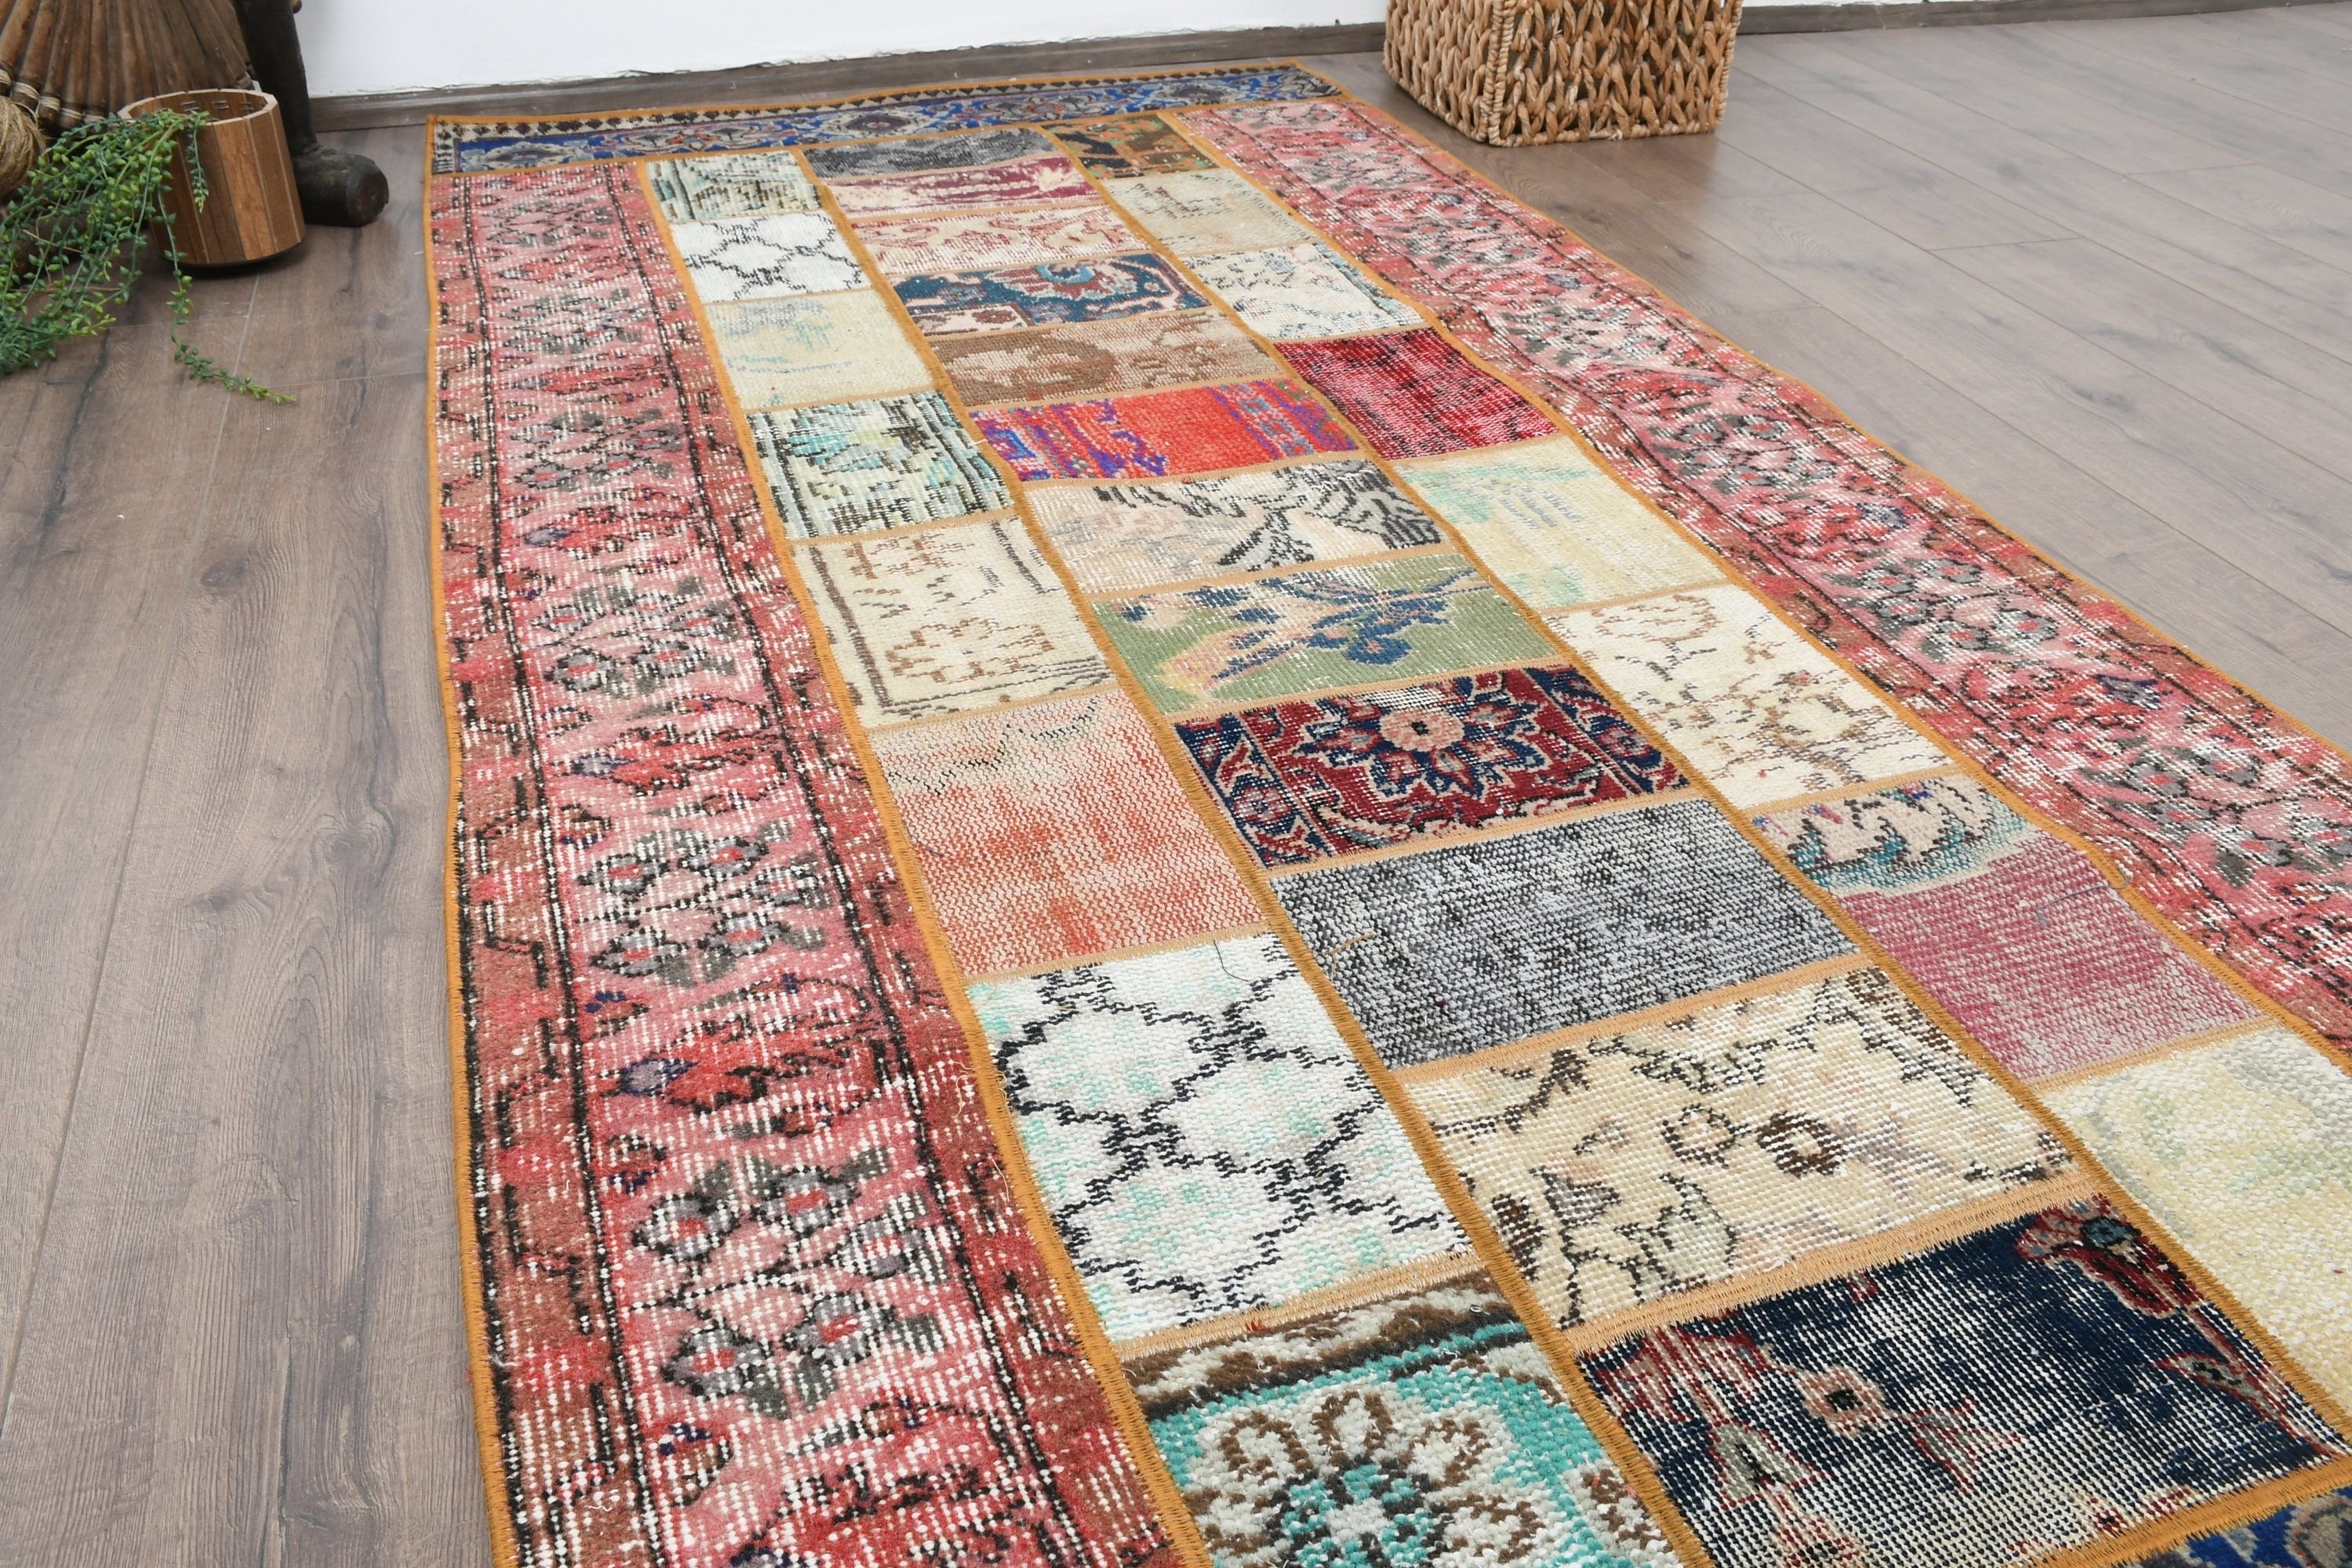 Nursery Rug, Cool Rug, Turkish Rug, 3.3x7 ft Accent Rug, Rugs for Entry, Vintage Rugs, Bedroom Rugs, Red Anatolian Rug